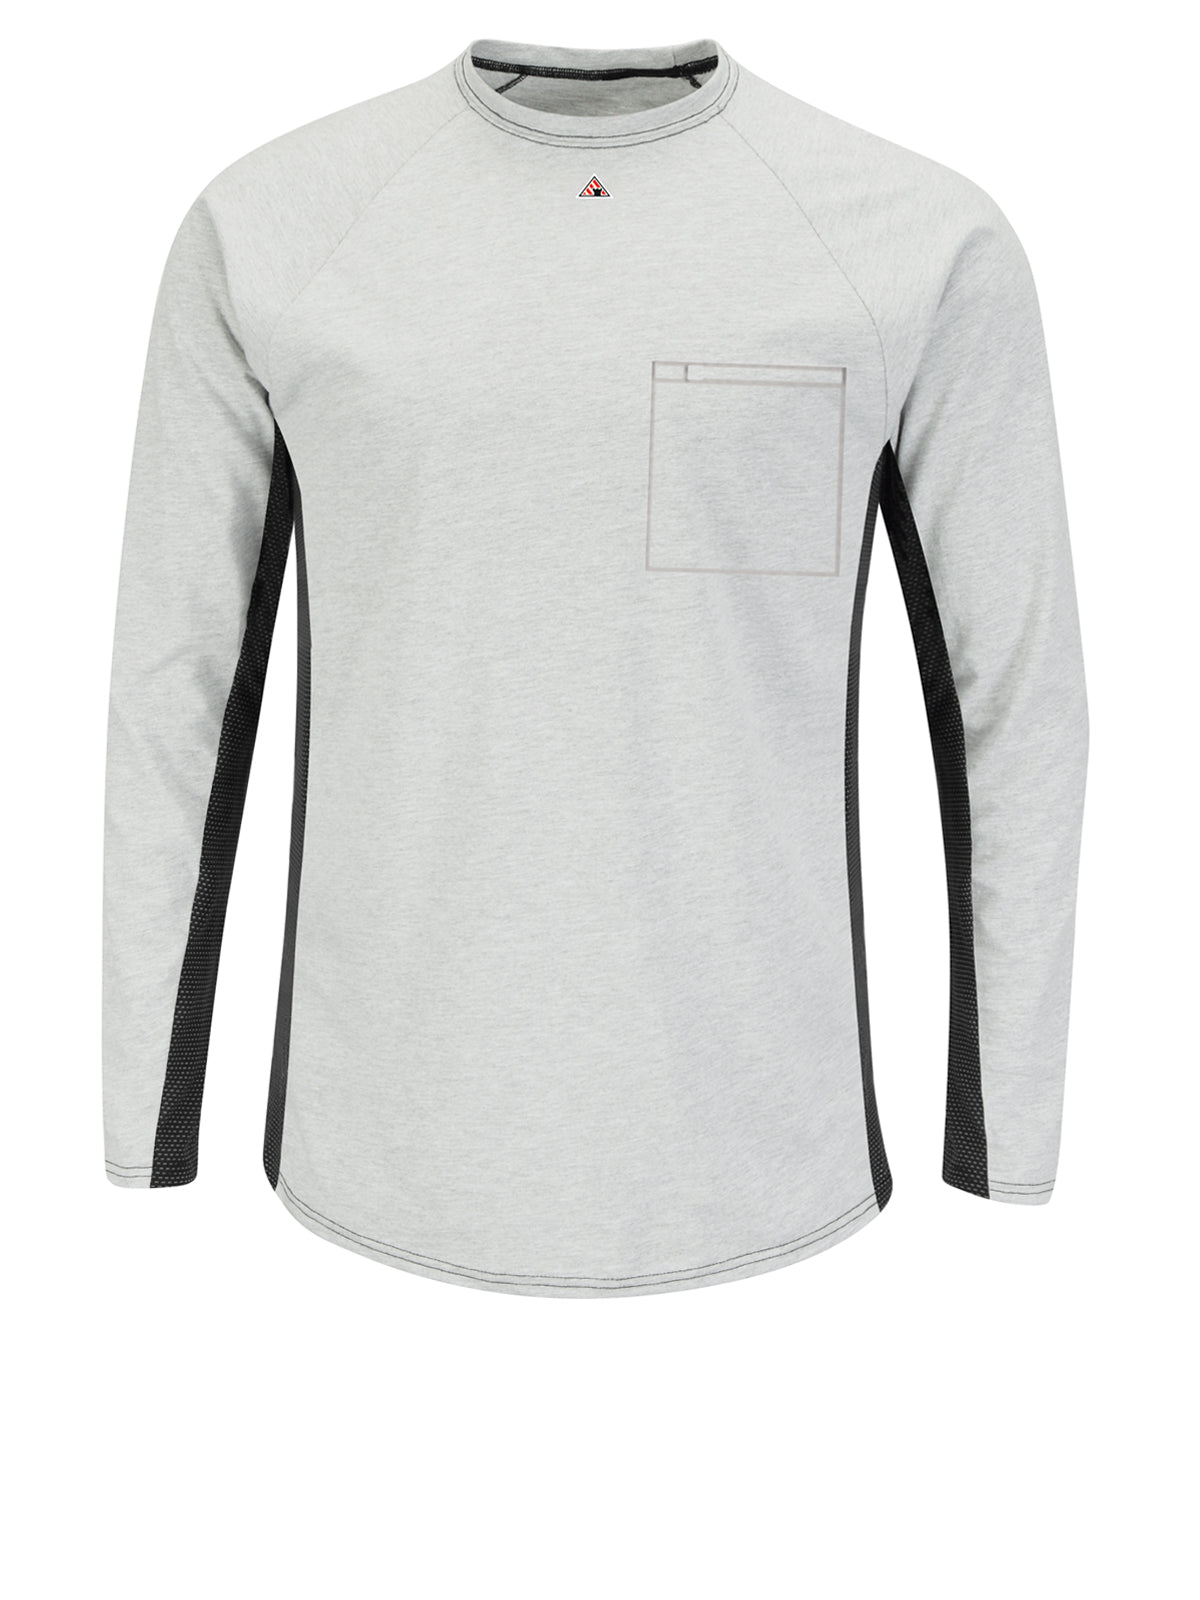 Men's Flame-Resistant Long Sleeve Base Layer Shirt - MPS8 - Grey